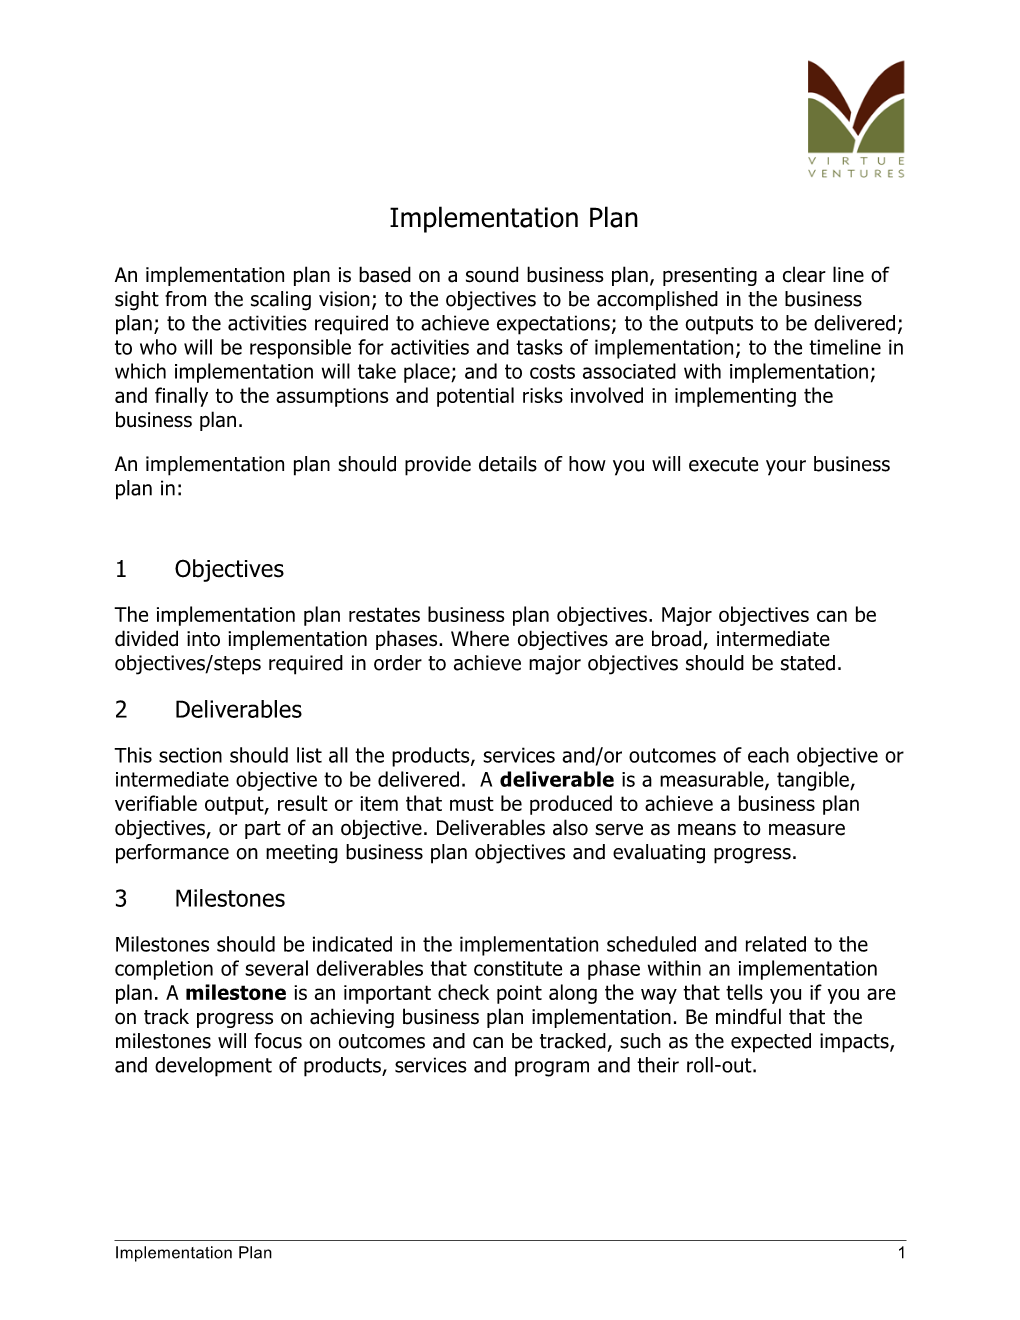 Implementation Plan Guidelines